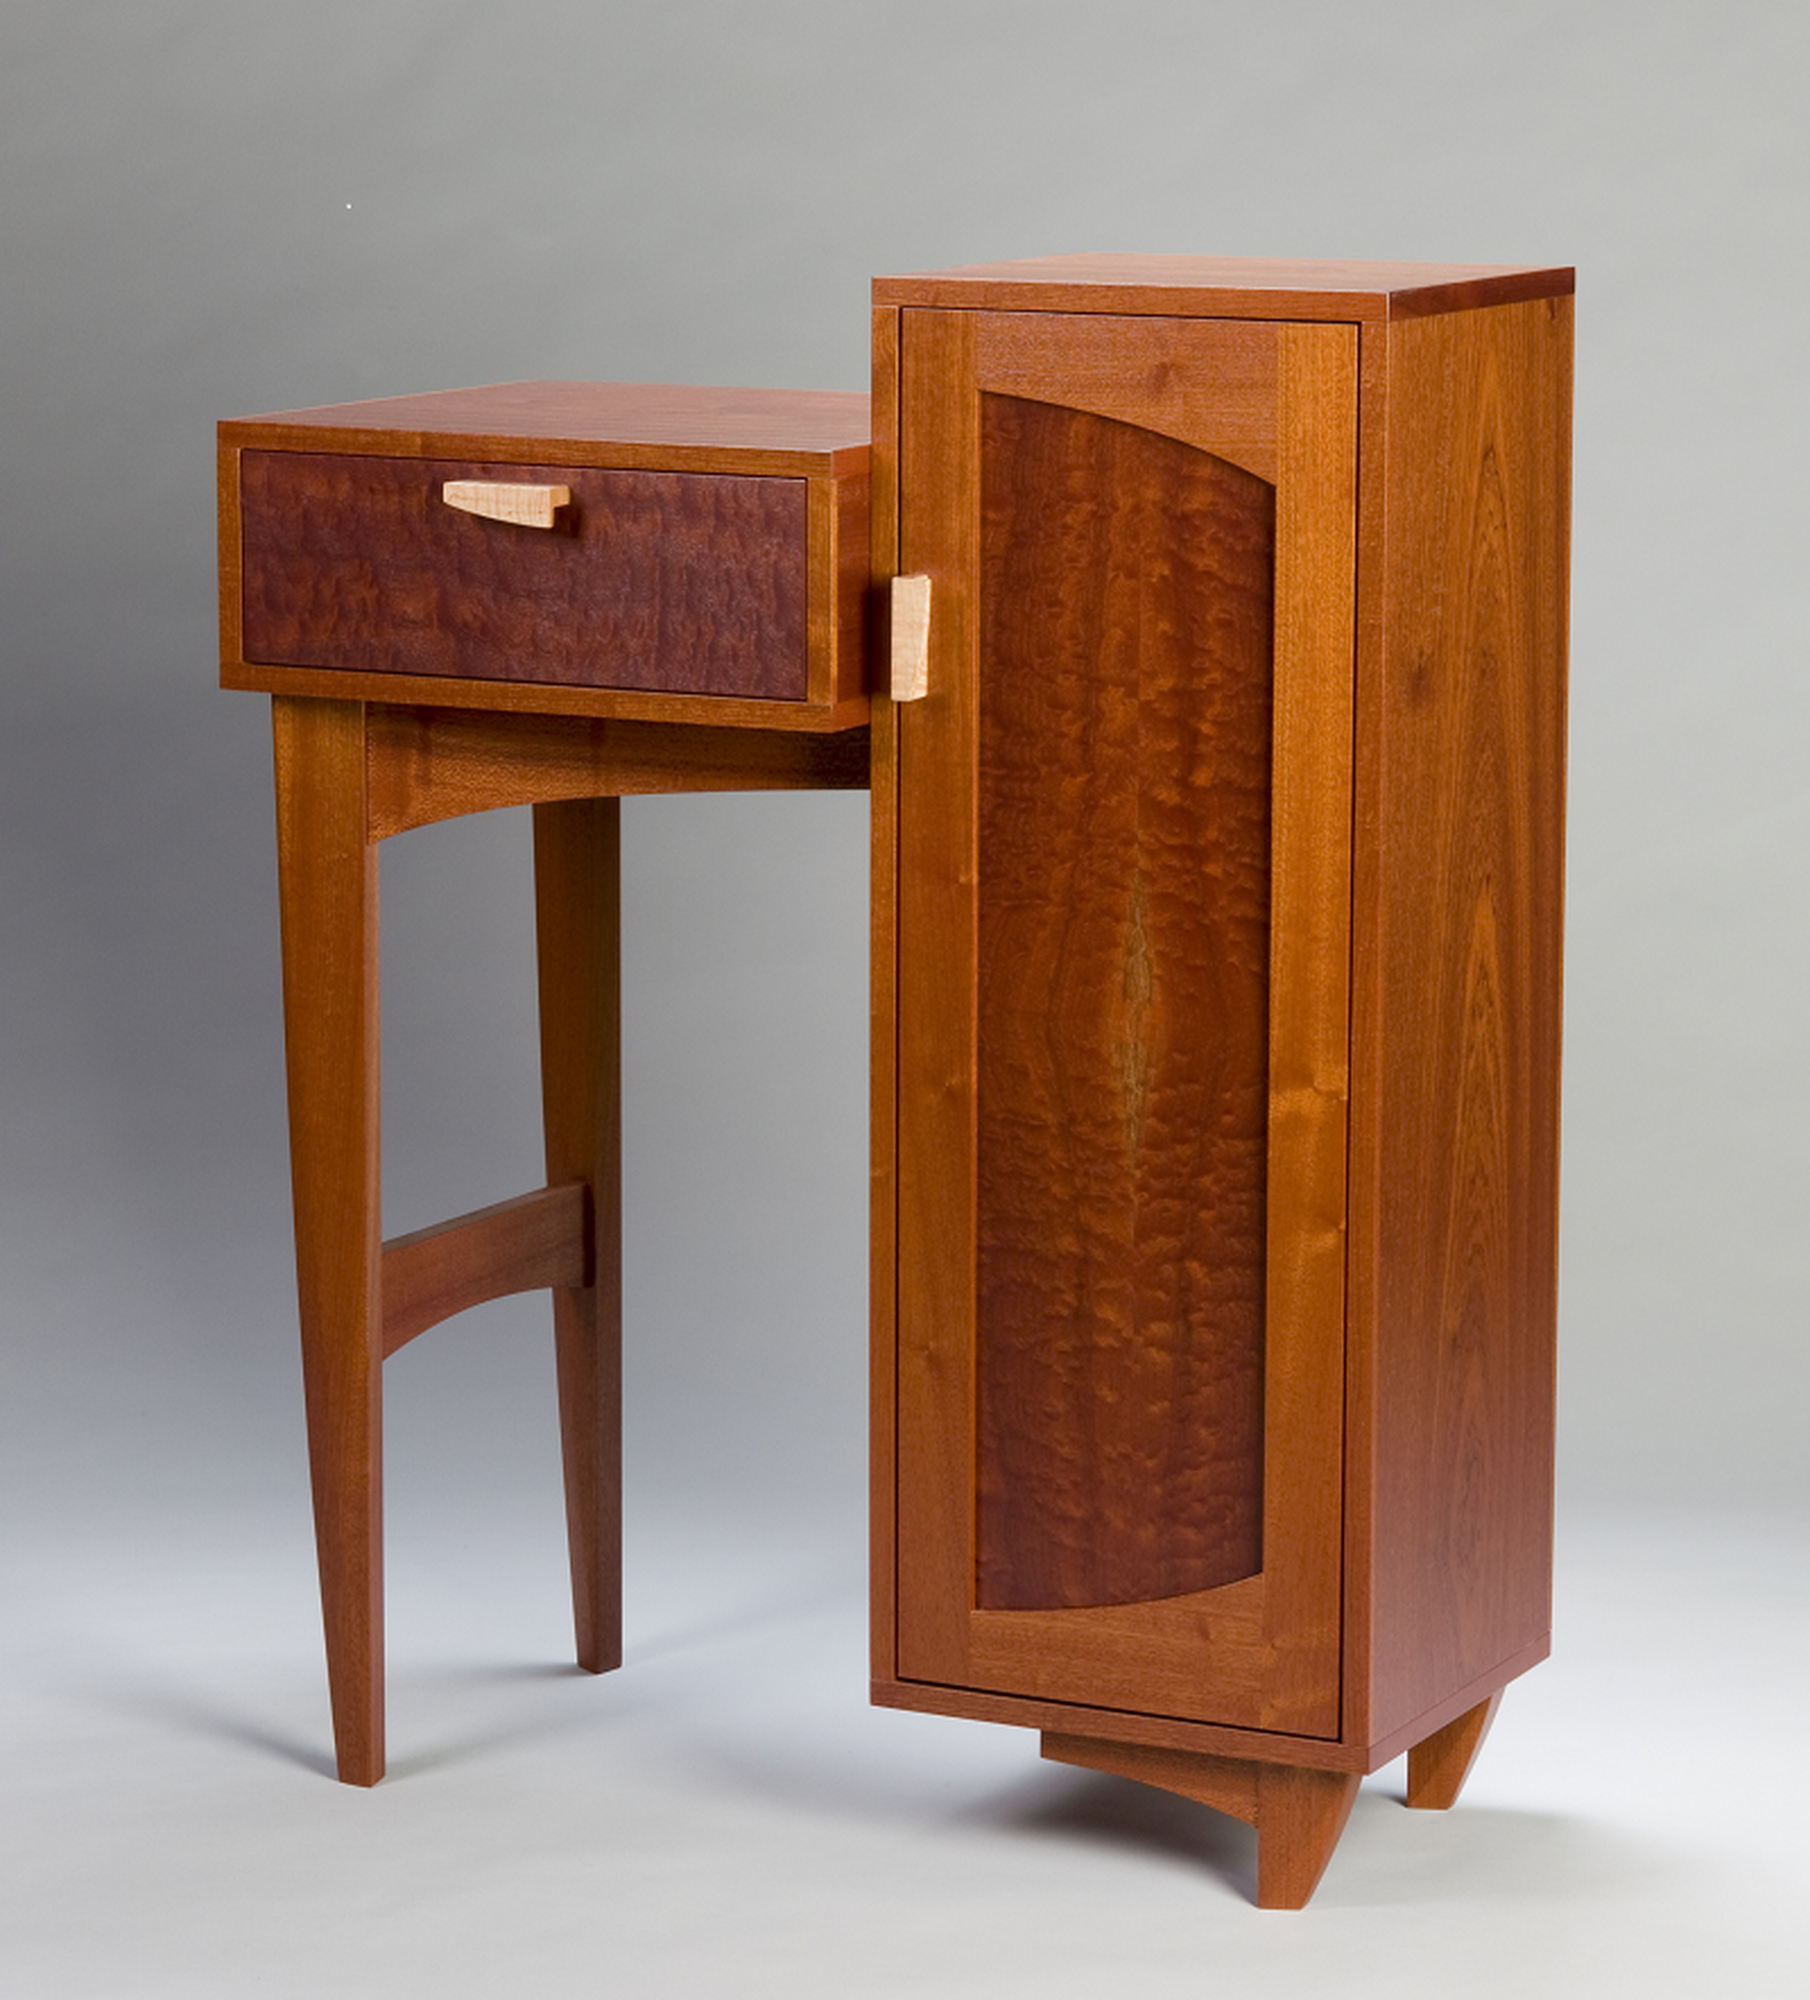 Funky cabinet madeFrom Sapele